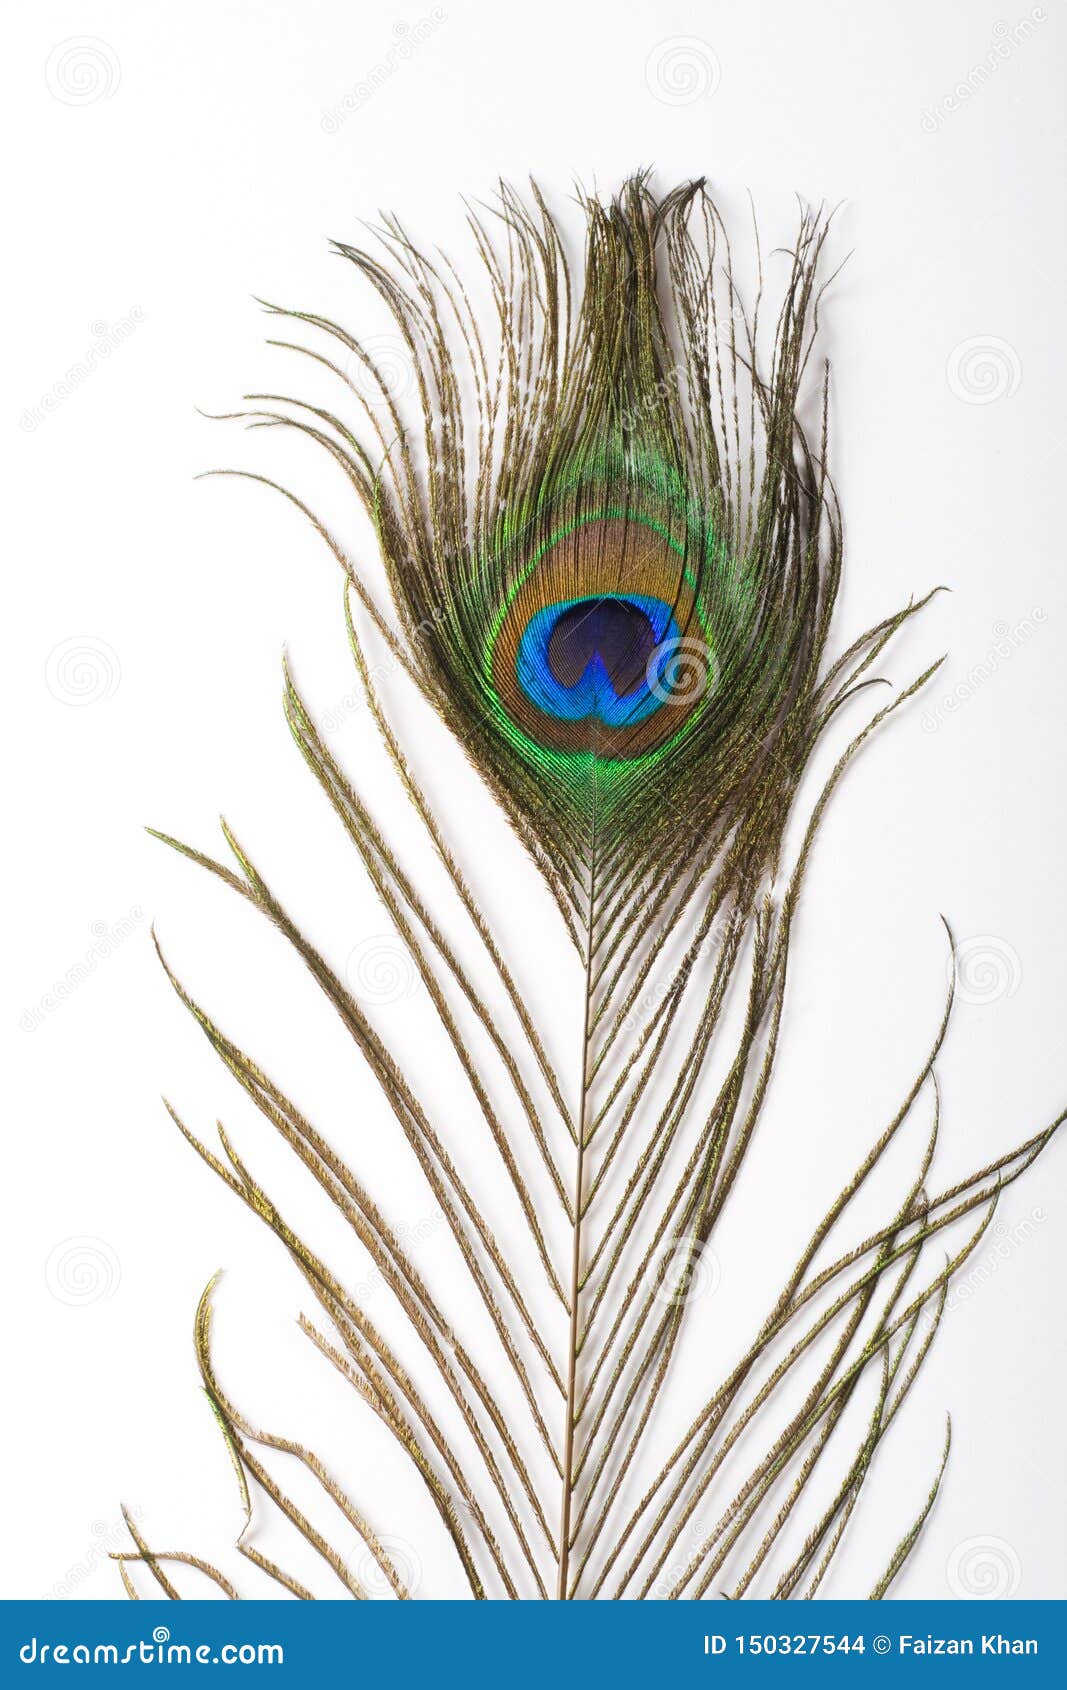 Peacock Feather or Morpankh Isolated on White Background Stock Photo ...